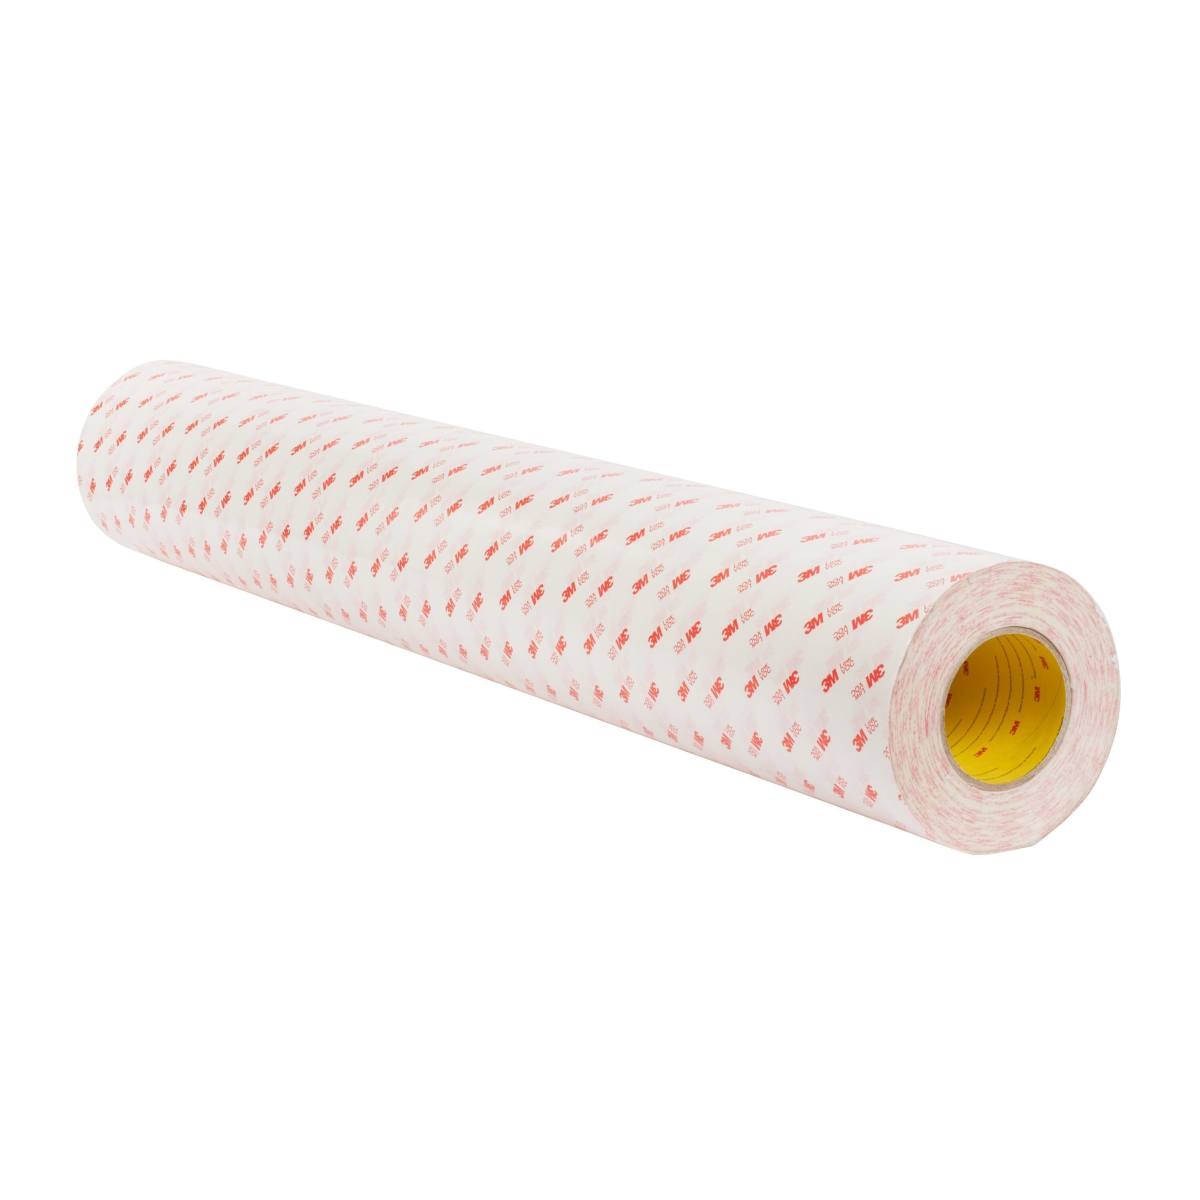 3M Double-sided adhesive tape with non-woven paper backing 99015LVC, white, 1500 mm x 200 m, 0.15 mm